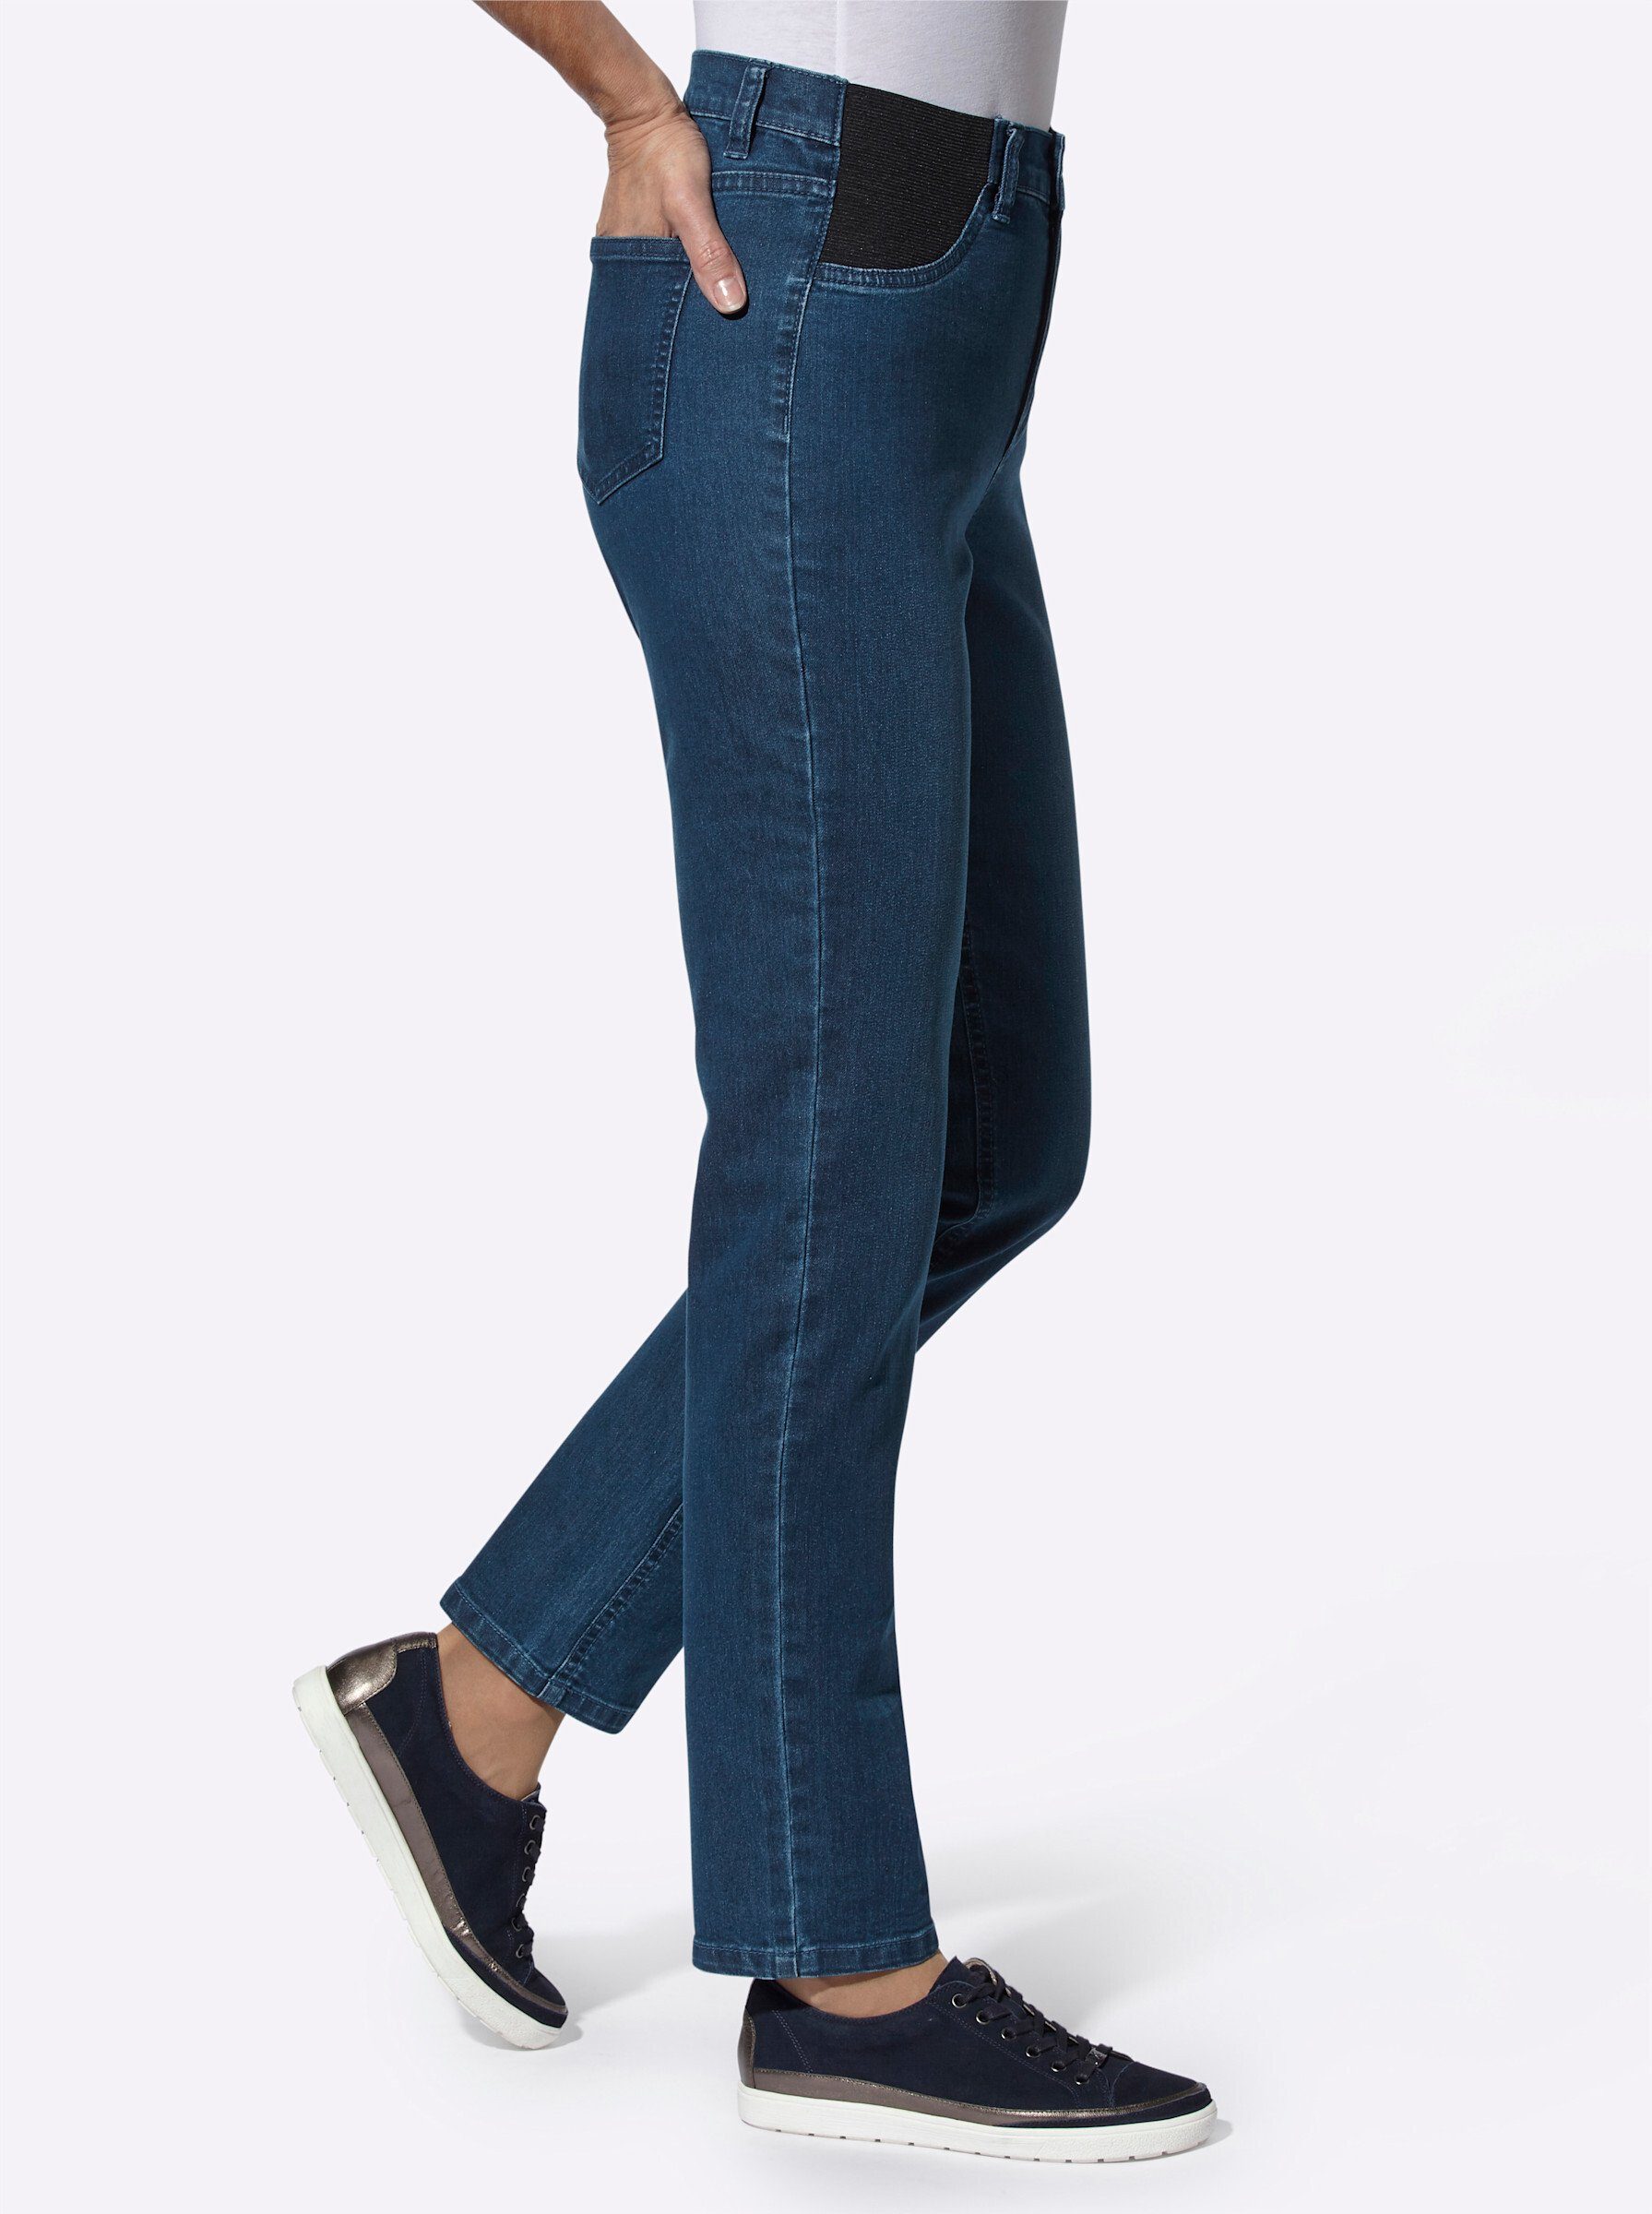 Jeans Sieh Bequeme blue-stone-washed an!